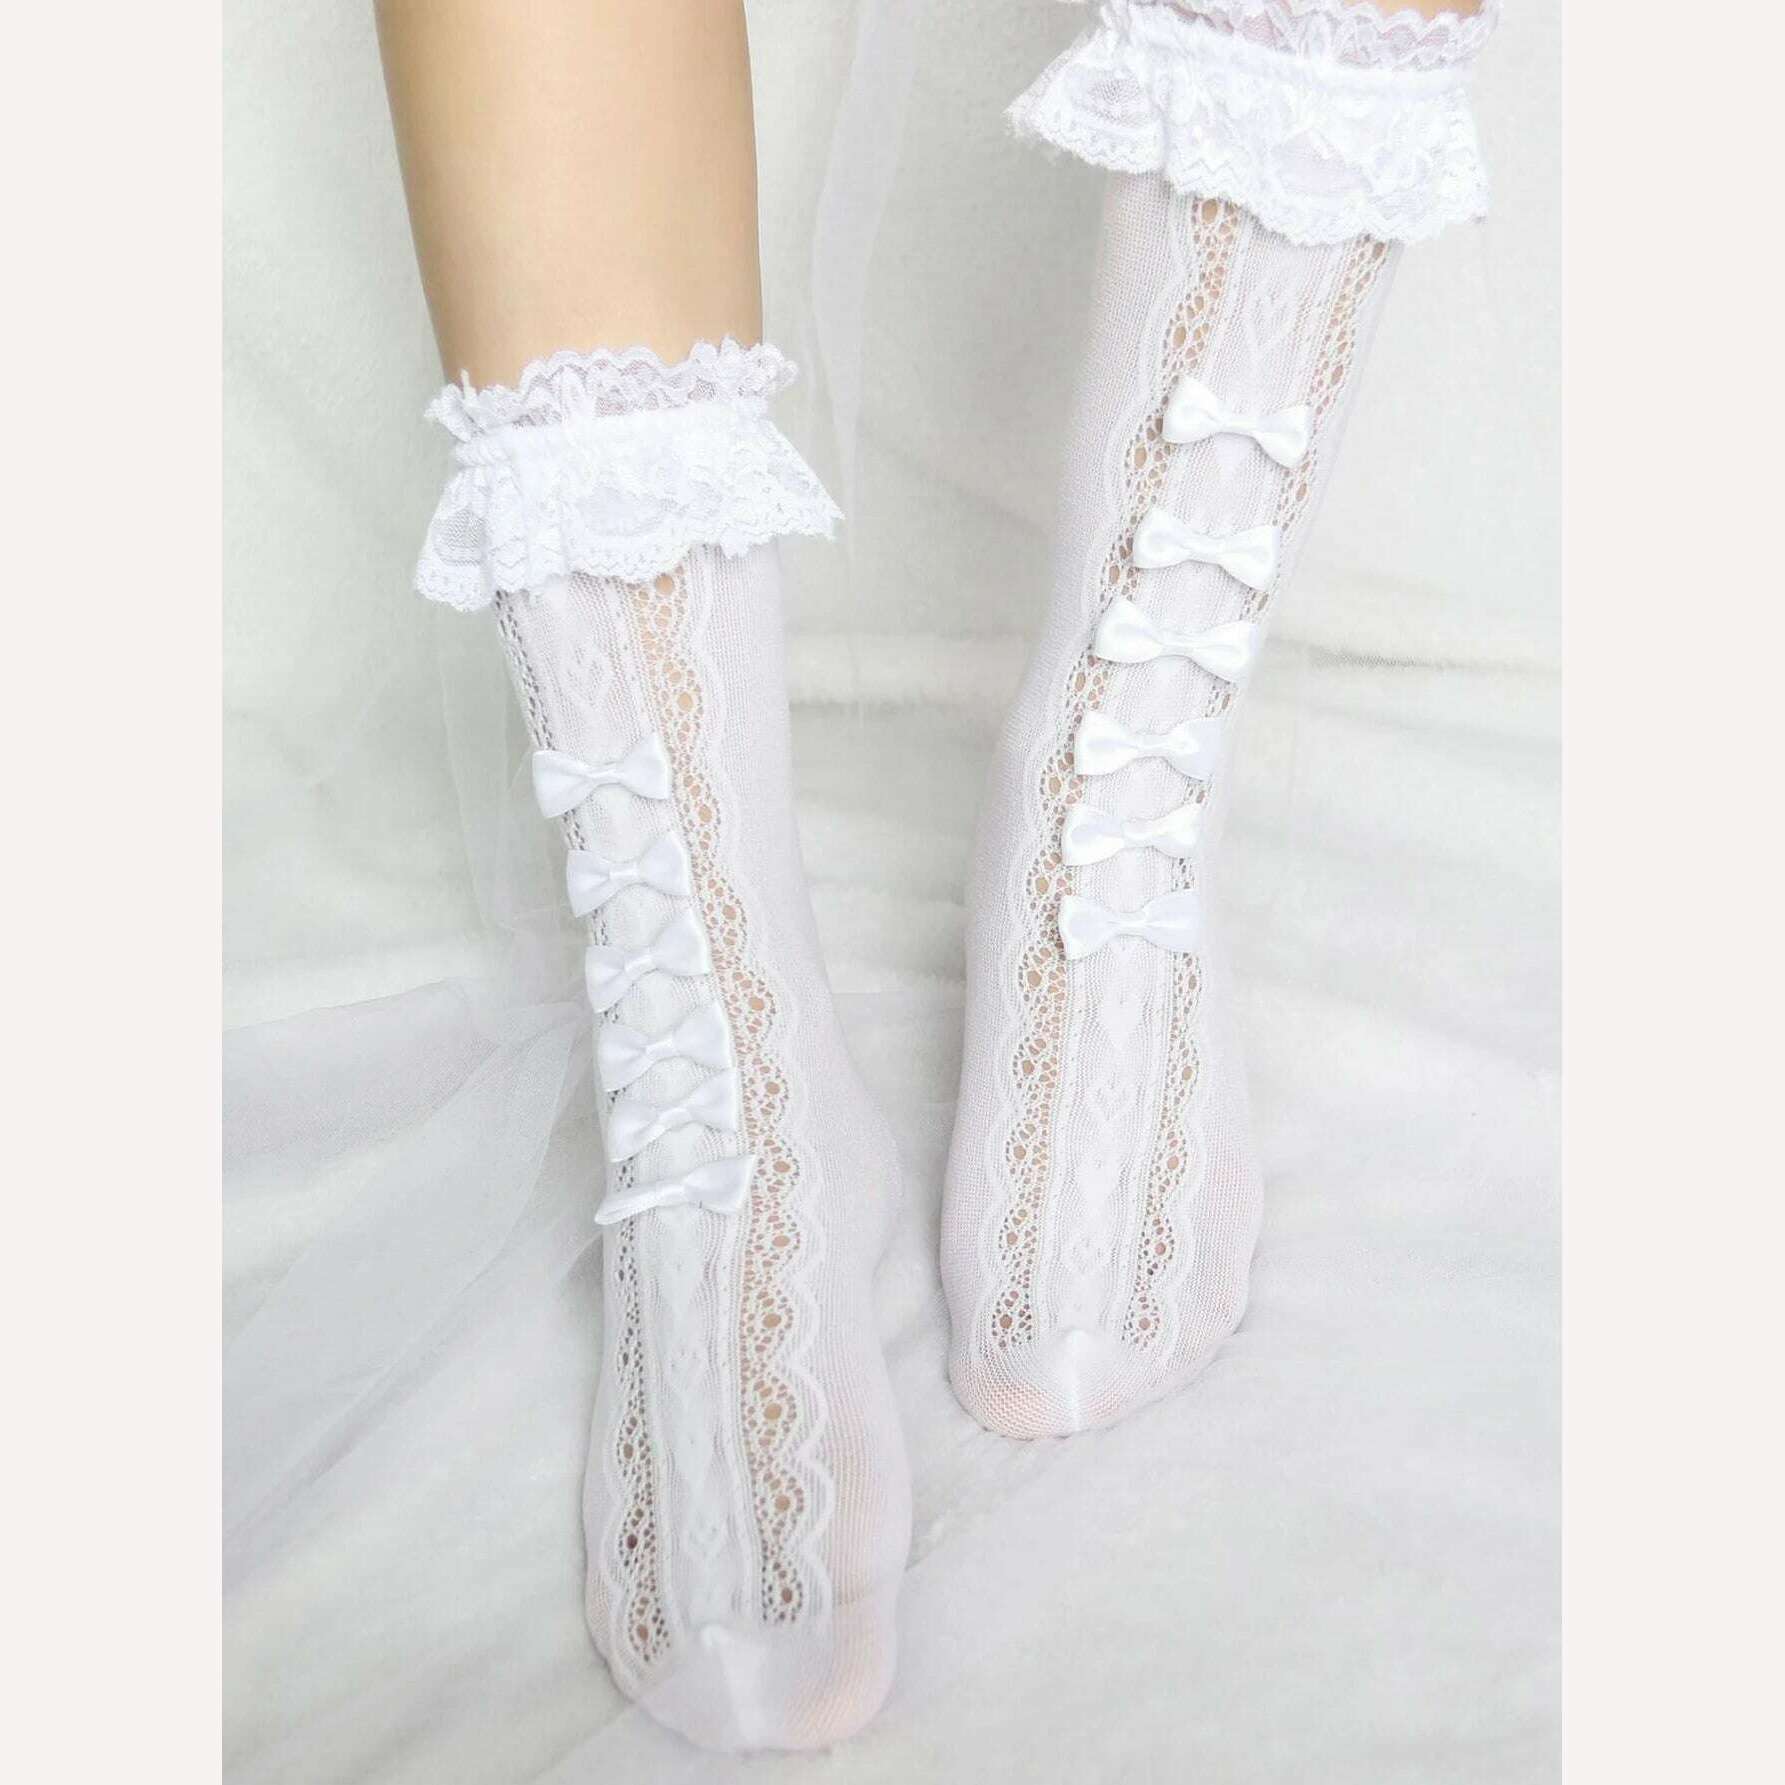 KIMLUD, 1 pair of bow shaped mid length stockings JK girls lace lace stockings Lolita princess coa long length lace bow shaped stockings, WHITE / One Size, KIMLUD Women's Clothes